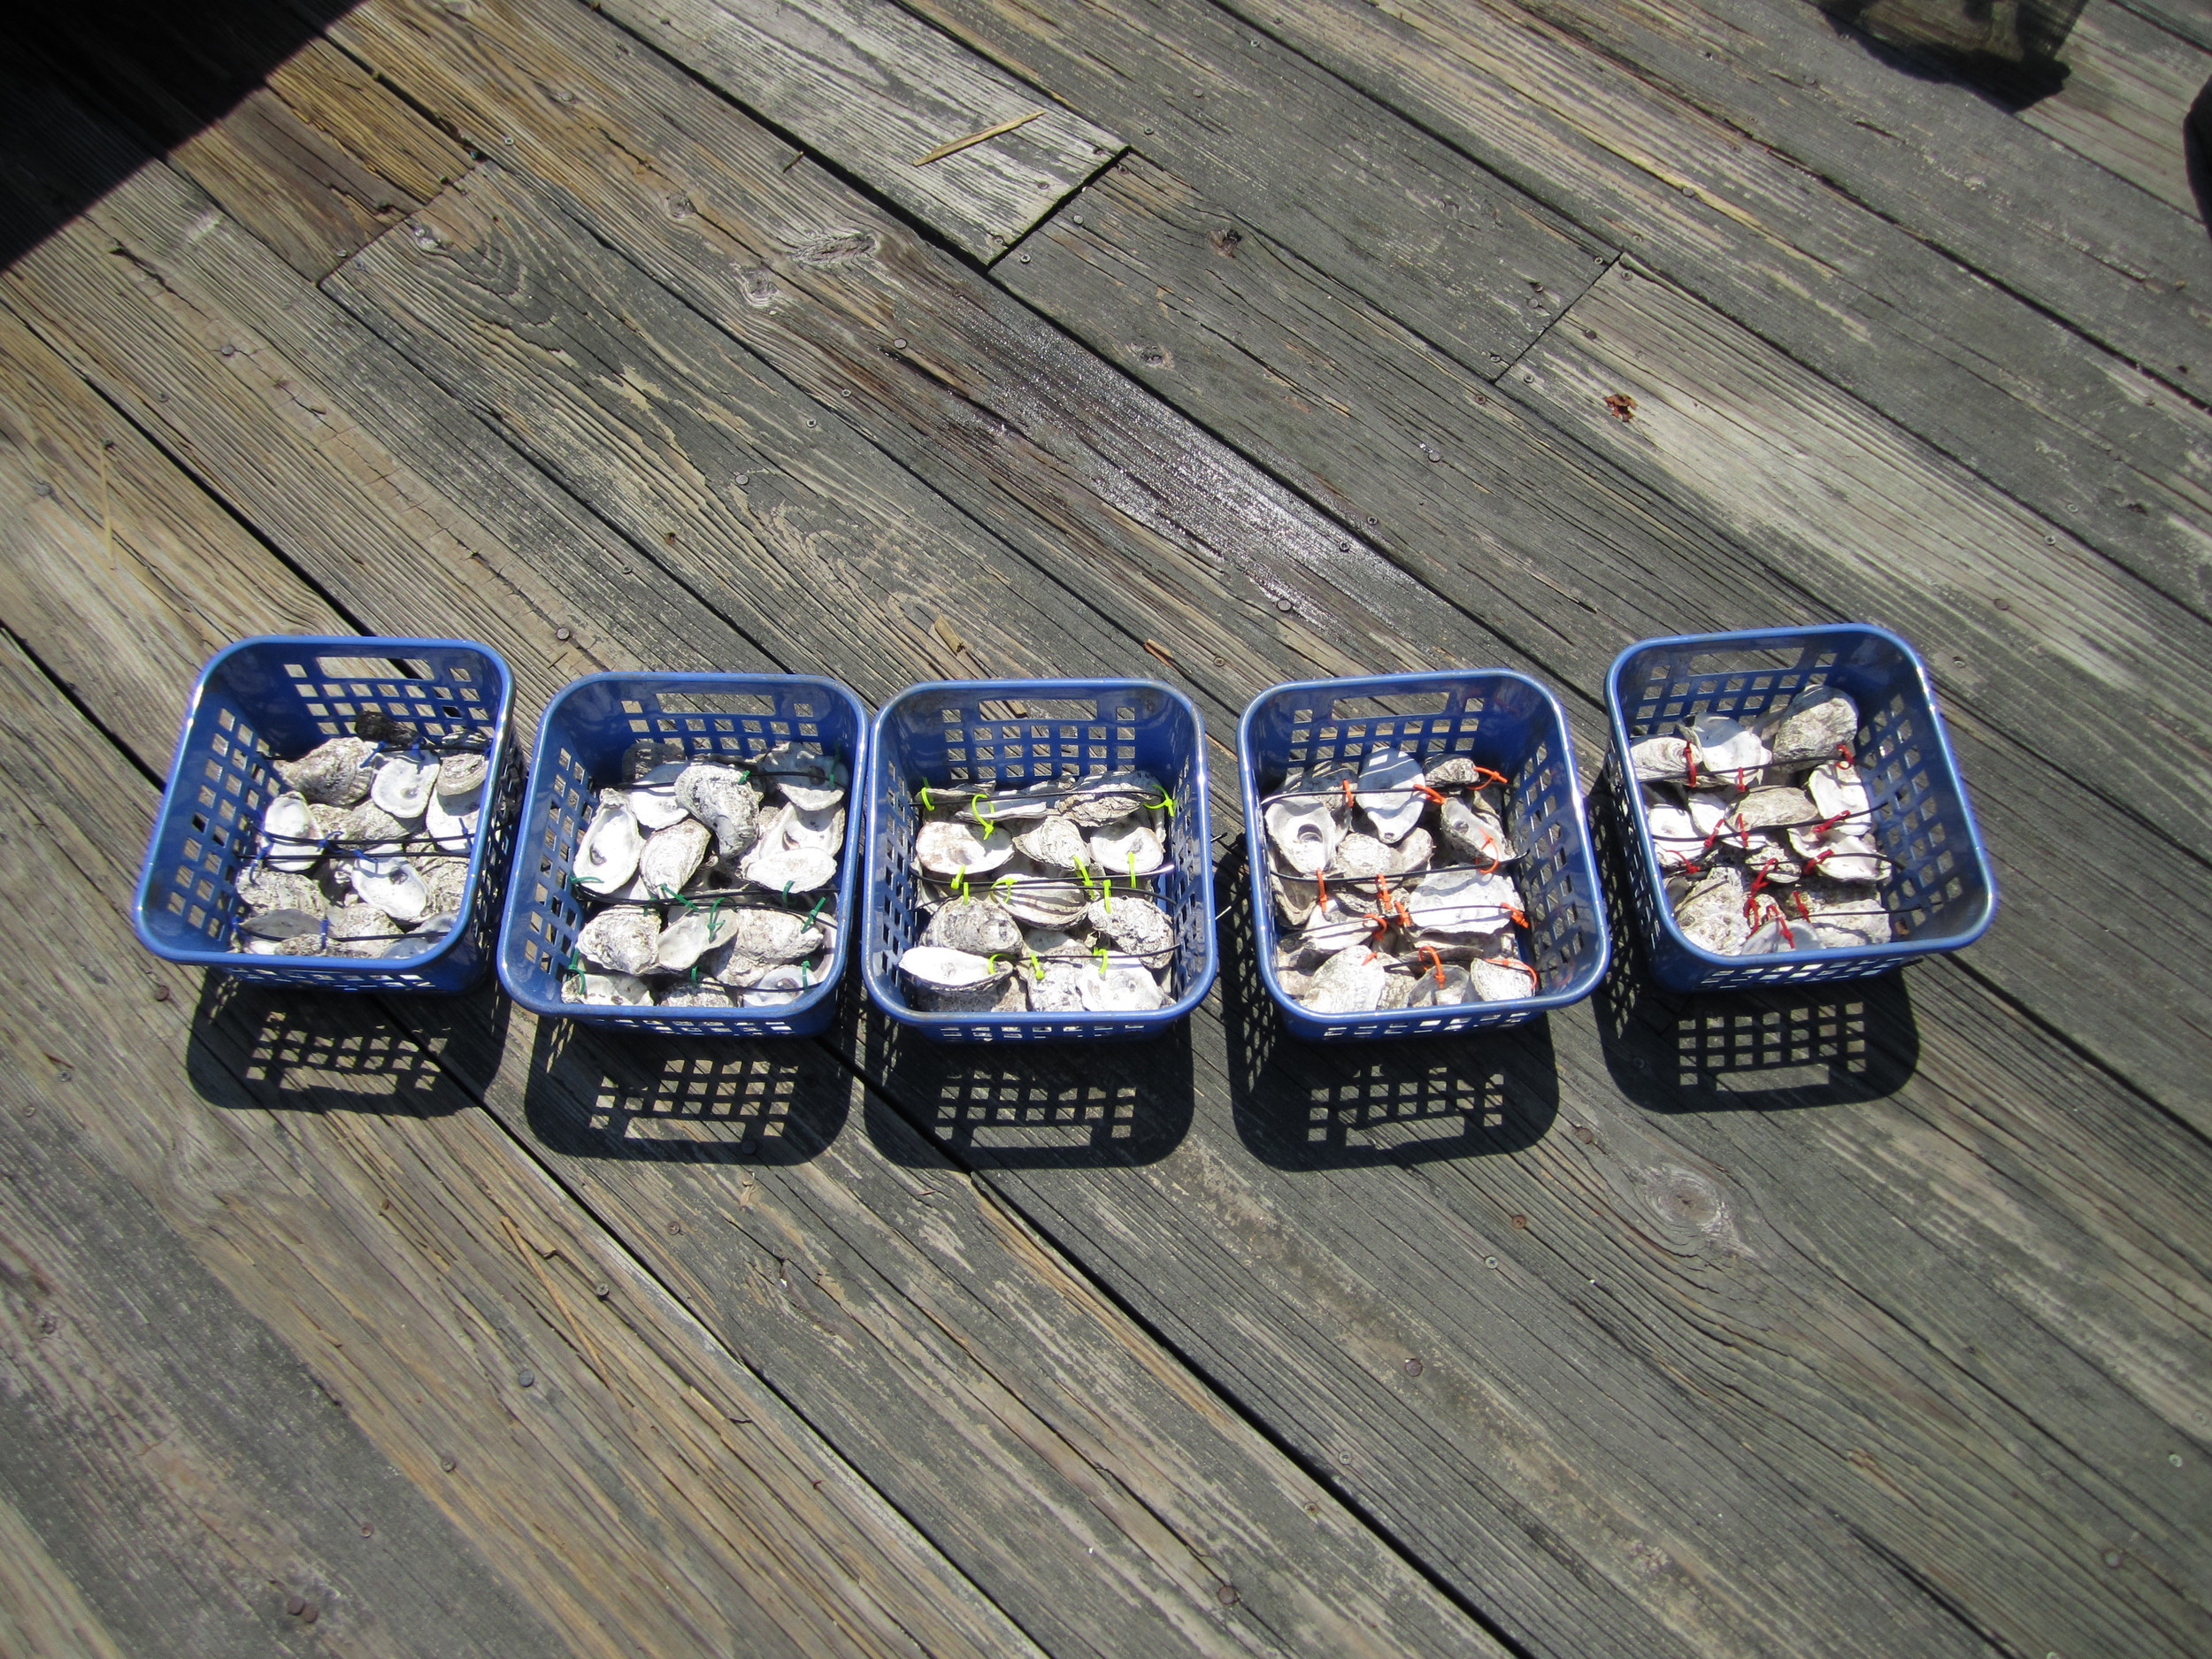 Colored cable ties serve two purposes: indicate basket deployment location and attach treatment oysters to basket